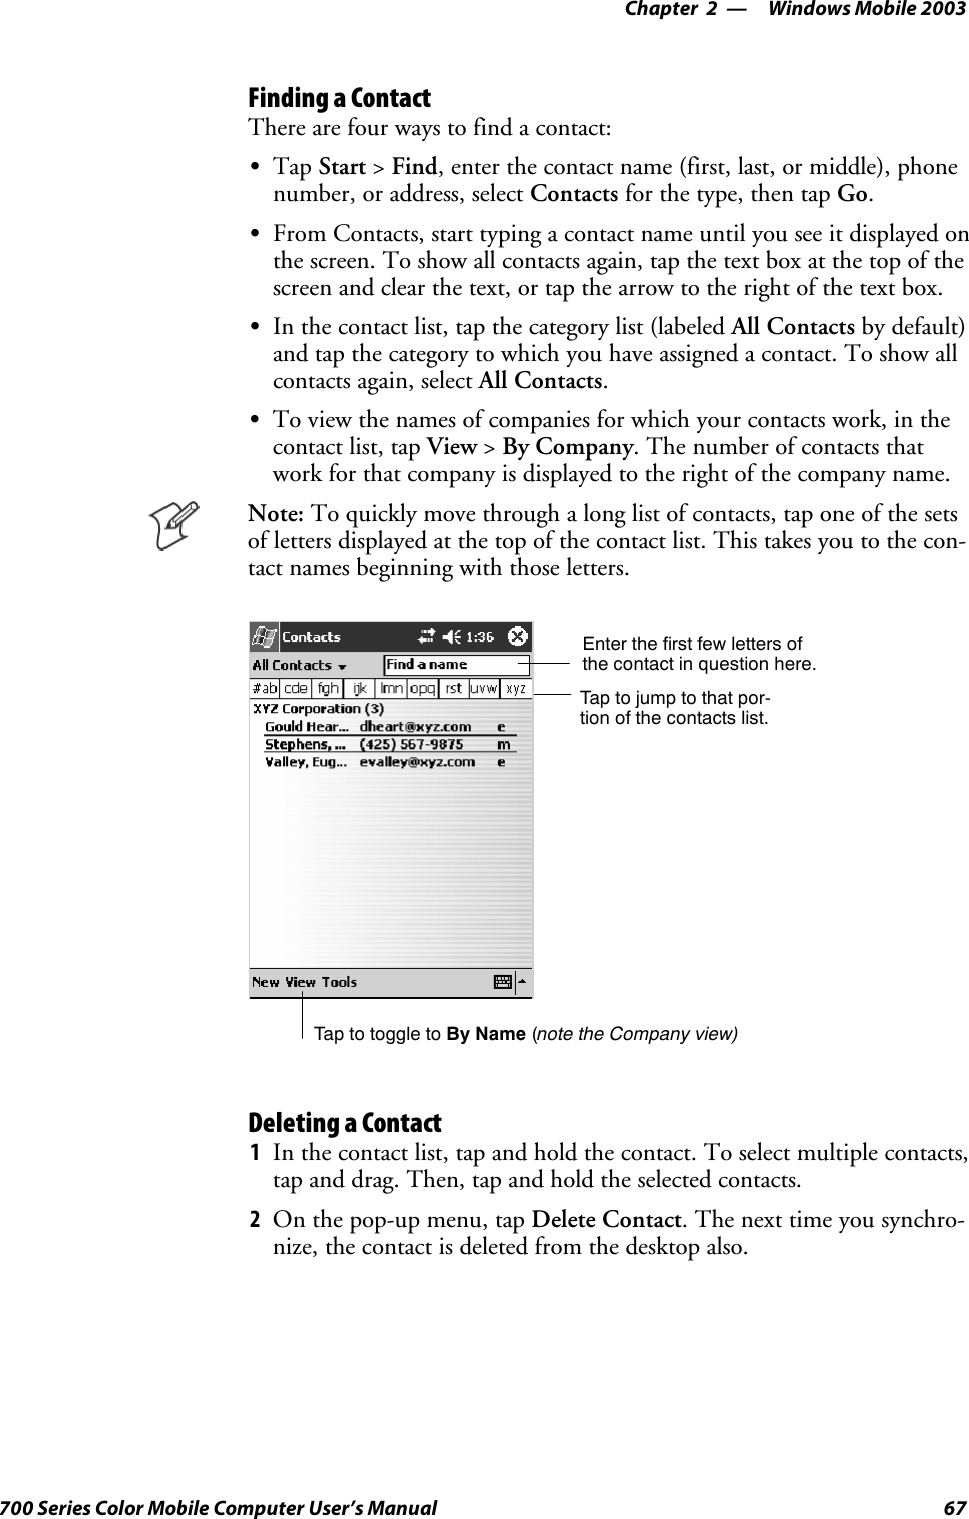 Windows Mobile 2003—Chapter 267700 Series Color Mobile Computer User’s ManualFinding a ContactThere are four ways to find a contact:STap Start &gt;Find, enter the contact name (first, last, or middle), phonenumber, or address, select Contacts for the type, then tap Go.SFrom Contacts, start typing a contact name until you see it displayed onthe screen. To show all contacts again, tap the text box at the top of thescreen and clear the text, or tap the arrow to the right of the text box.SIn the contact list, tap the category list (labeled All Contacts by default)and tap the category to which you have assigned a contact. To show allcontacts again, select All Contacts.STo view the names of companies for which your contacts work, in thecontact list, tap View &gt;By Company. The number of contacts thatwork for that company is displayed to the right of the company name.Note: To quickly move through a long list of contacts, tap one of the setsof letters displayed at the top of the contact list. This takes you to the con-tact names beginning with those letters.Taptojumptothatpor-tion of the contacts list.Enter the first few letters ofthe contact in question here.Tap to toggle to By Name (note the Company view)Deleting a Contact1In the contact list, tap and hold the contact. To select multiple contacts,tap and drag. Then, tap and hold the selected contacts.2On the pop-up menu, tap Delete Contact. The next time you synchro-nize, the contact is deleted from the desktop also.